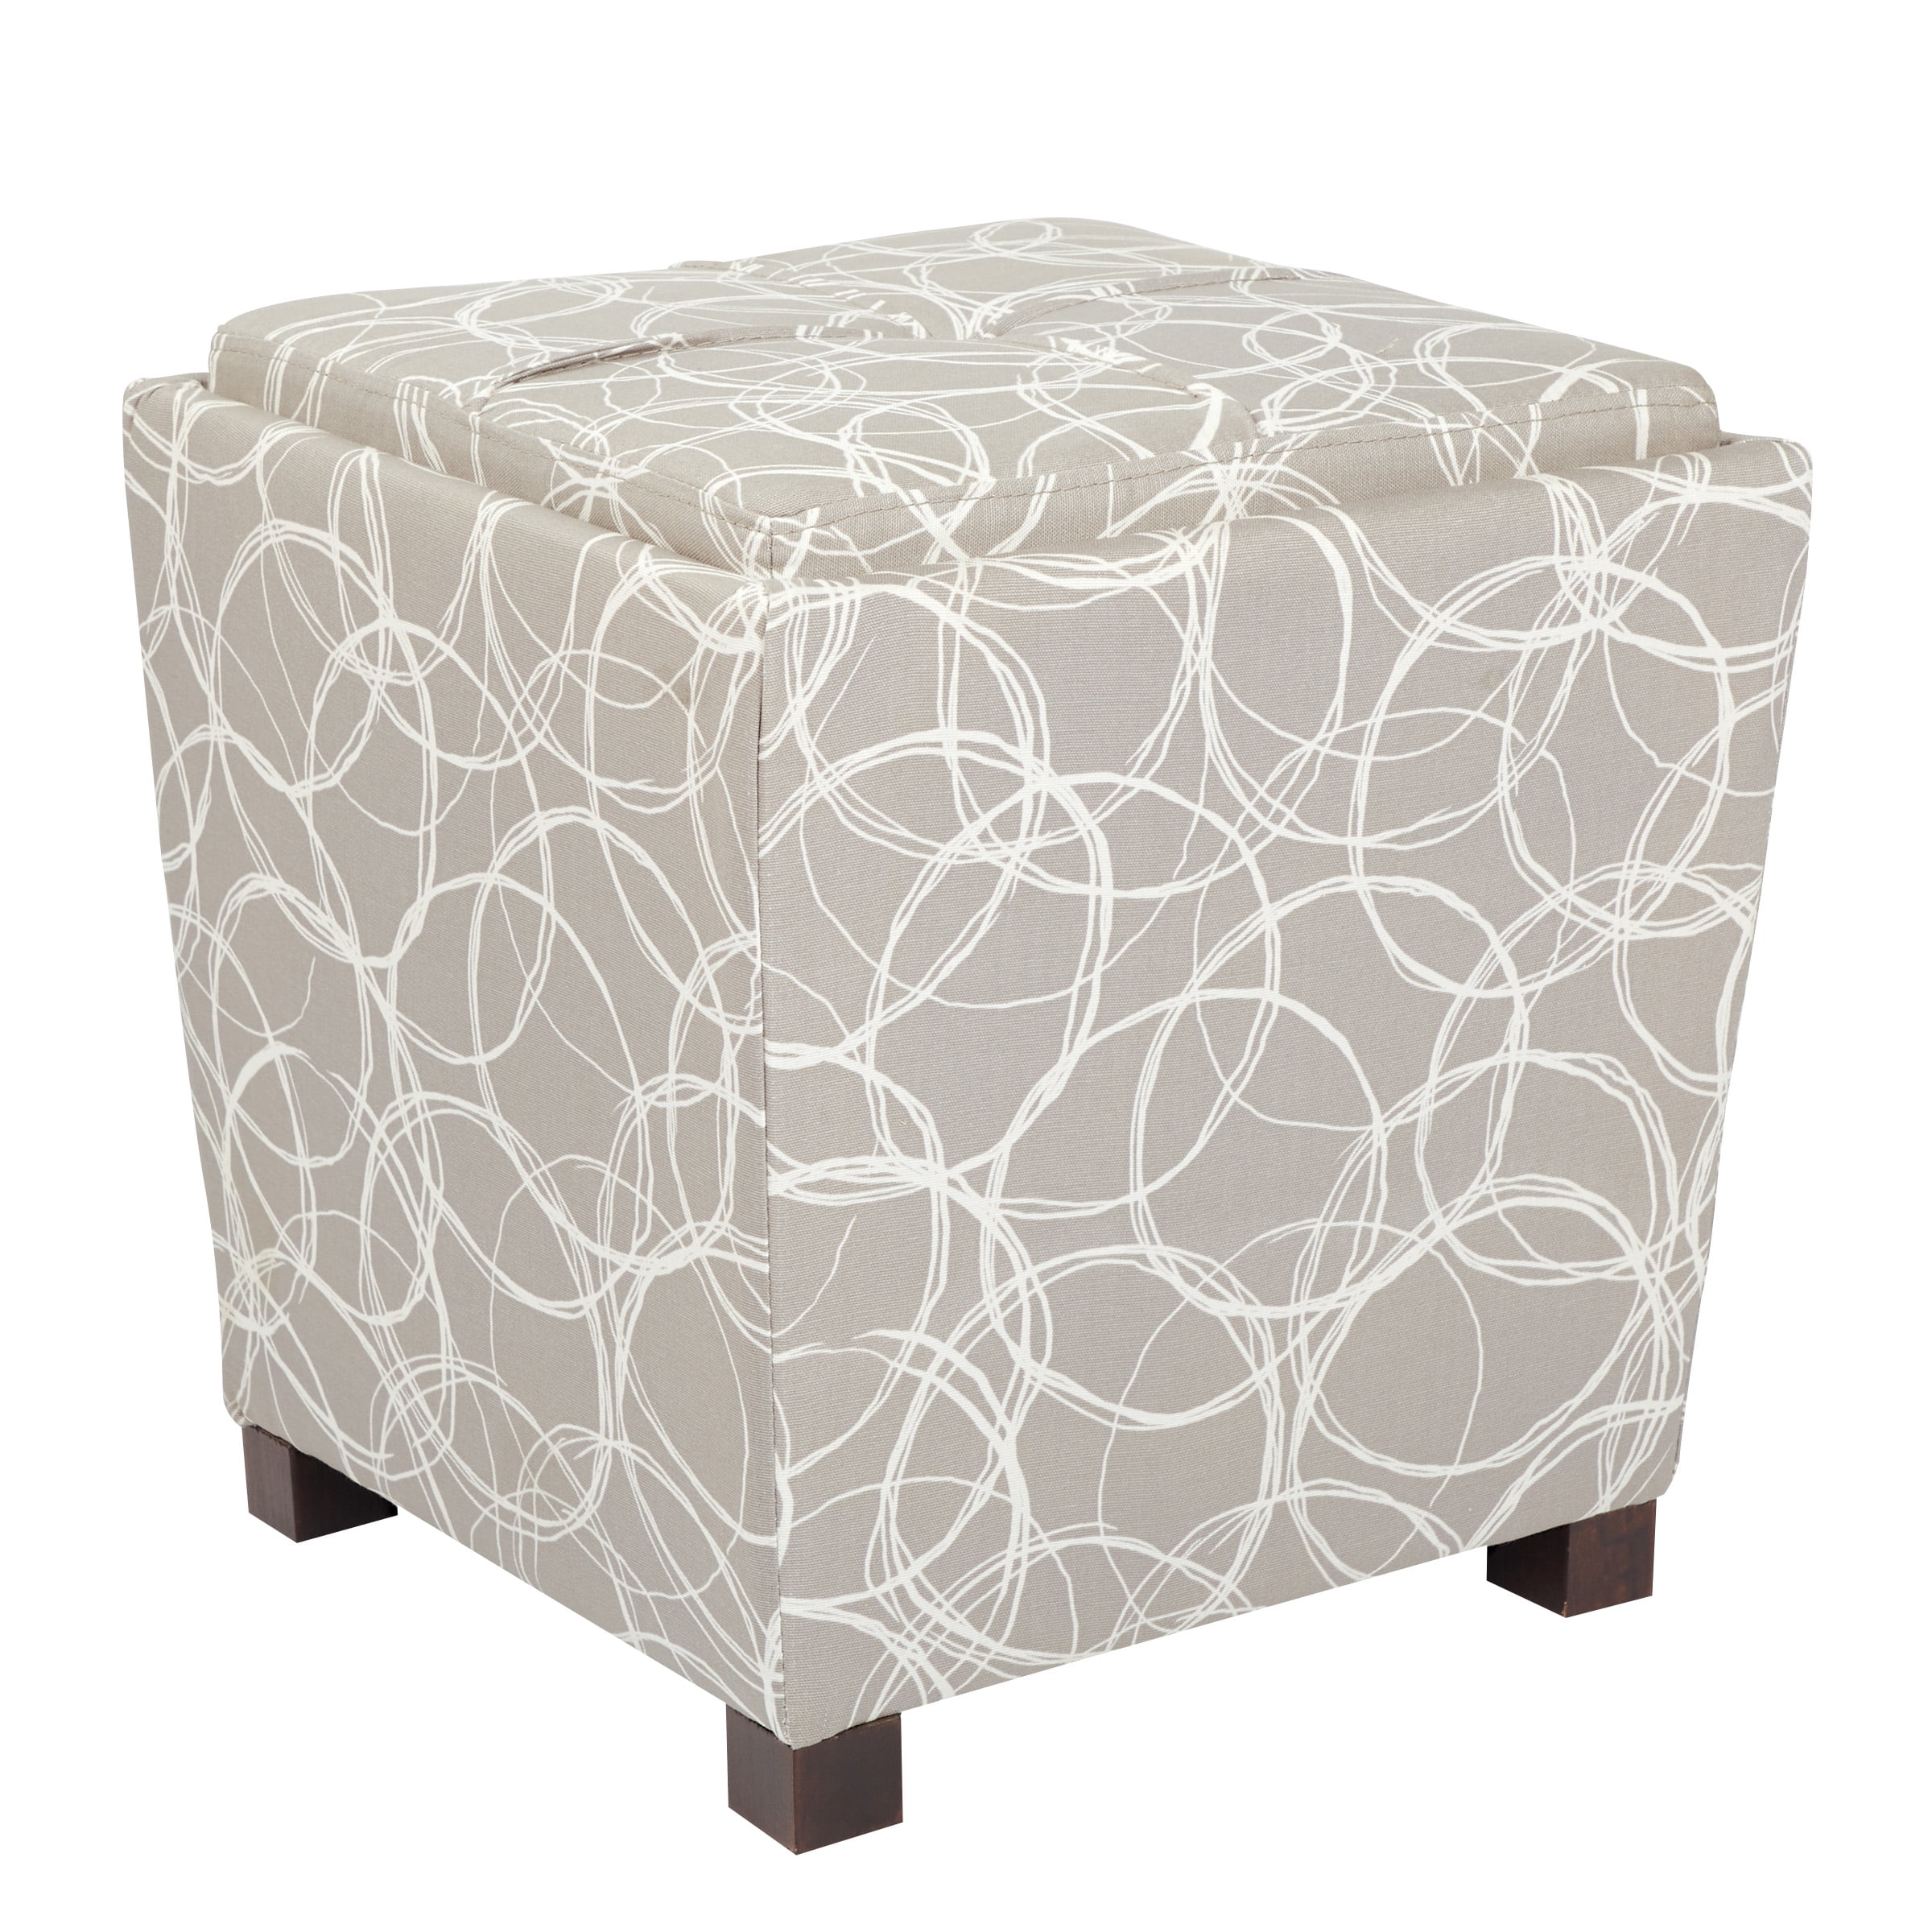 2 PIECE SET Button Top Footstool Storage Ottoman w/Tray Matching Cube MET361V 